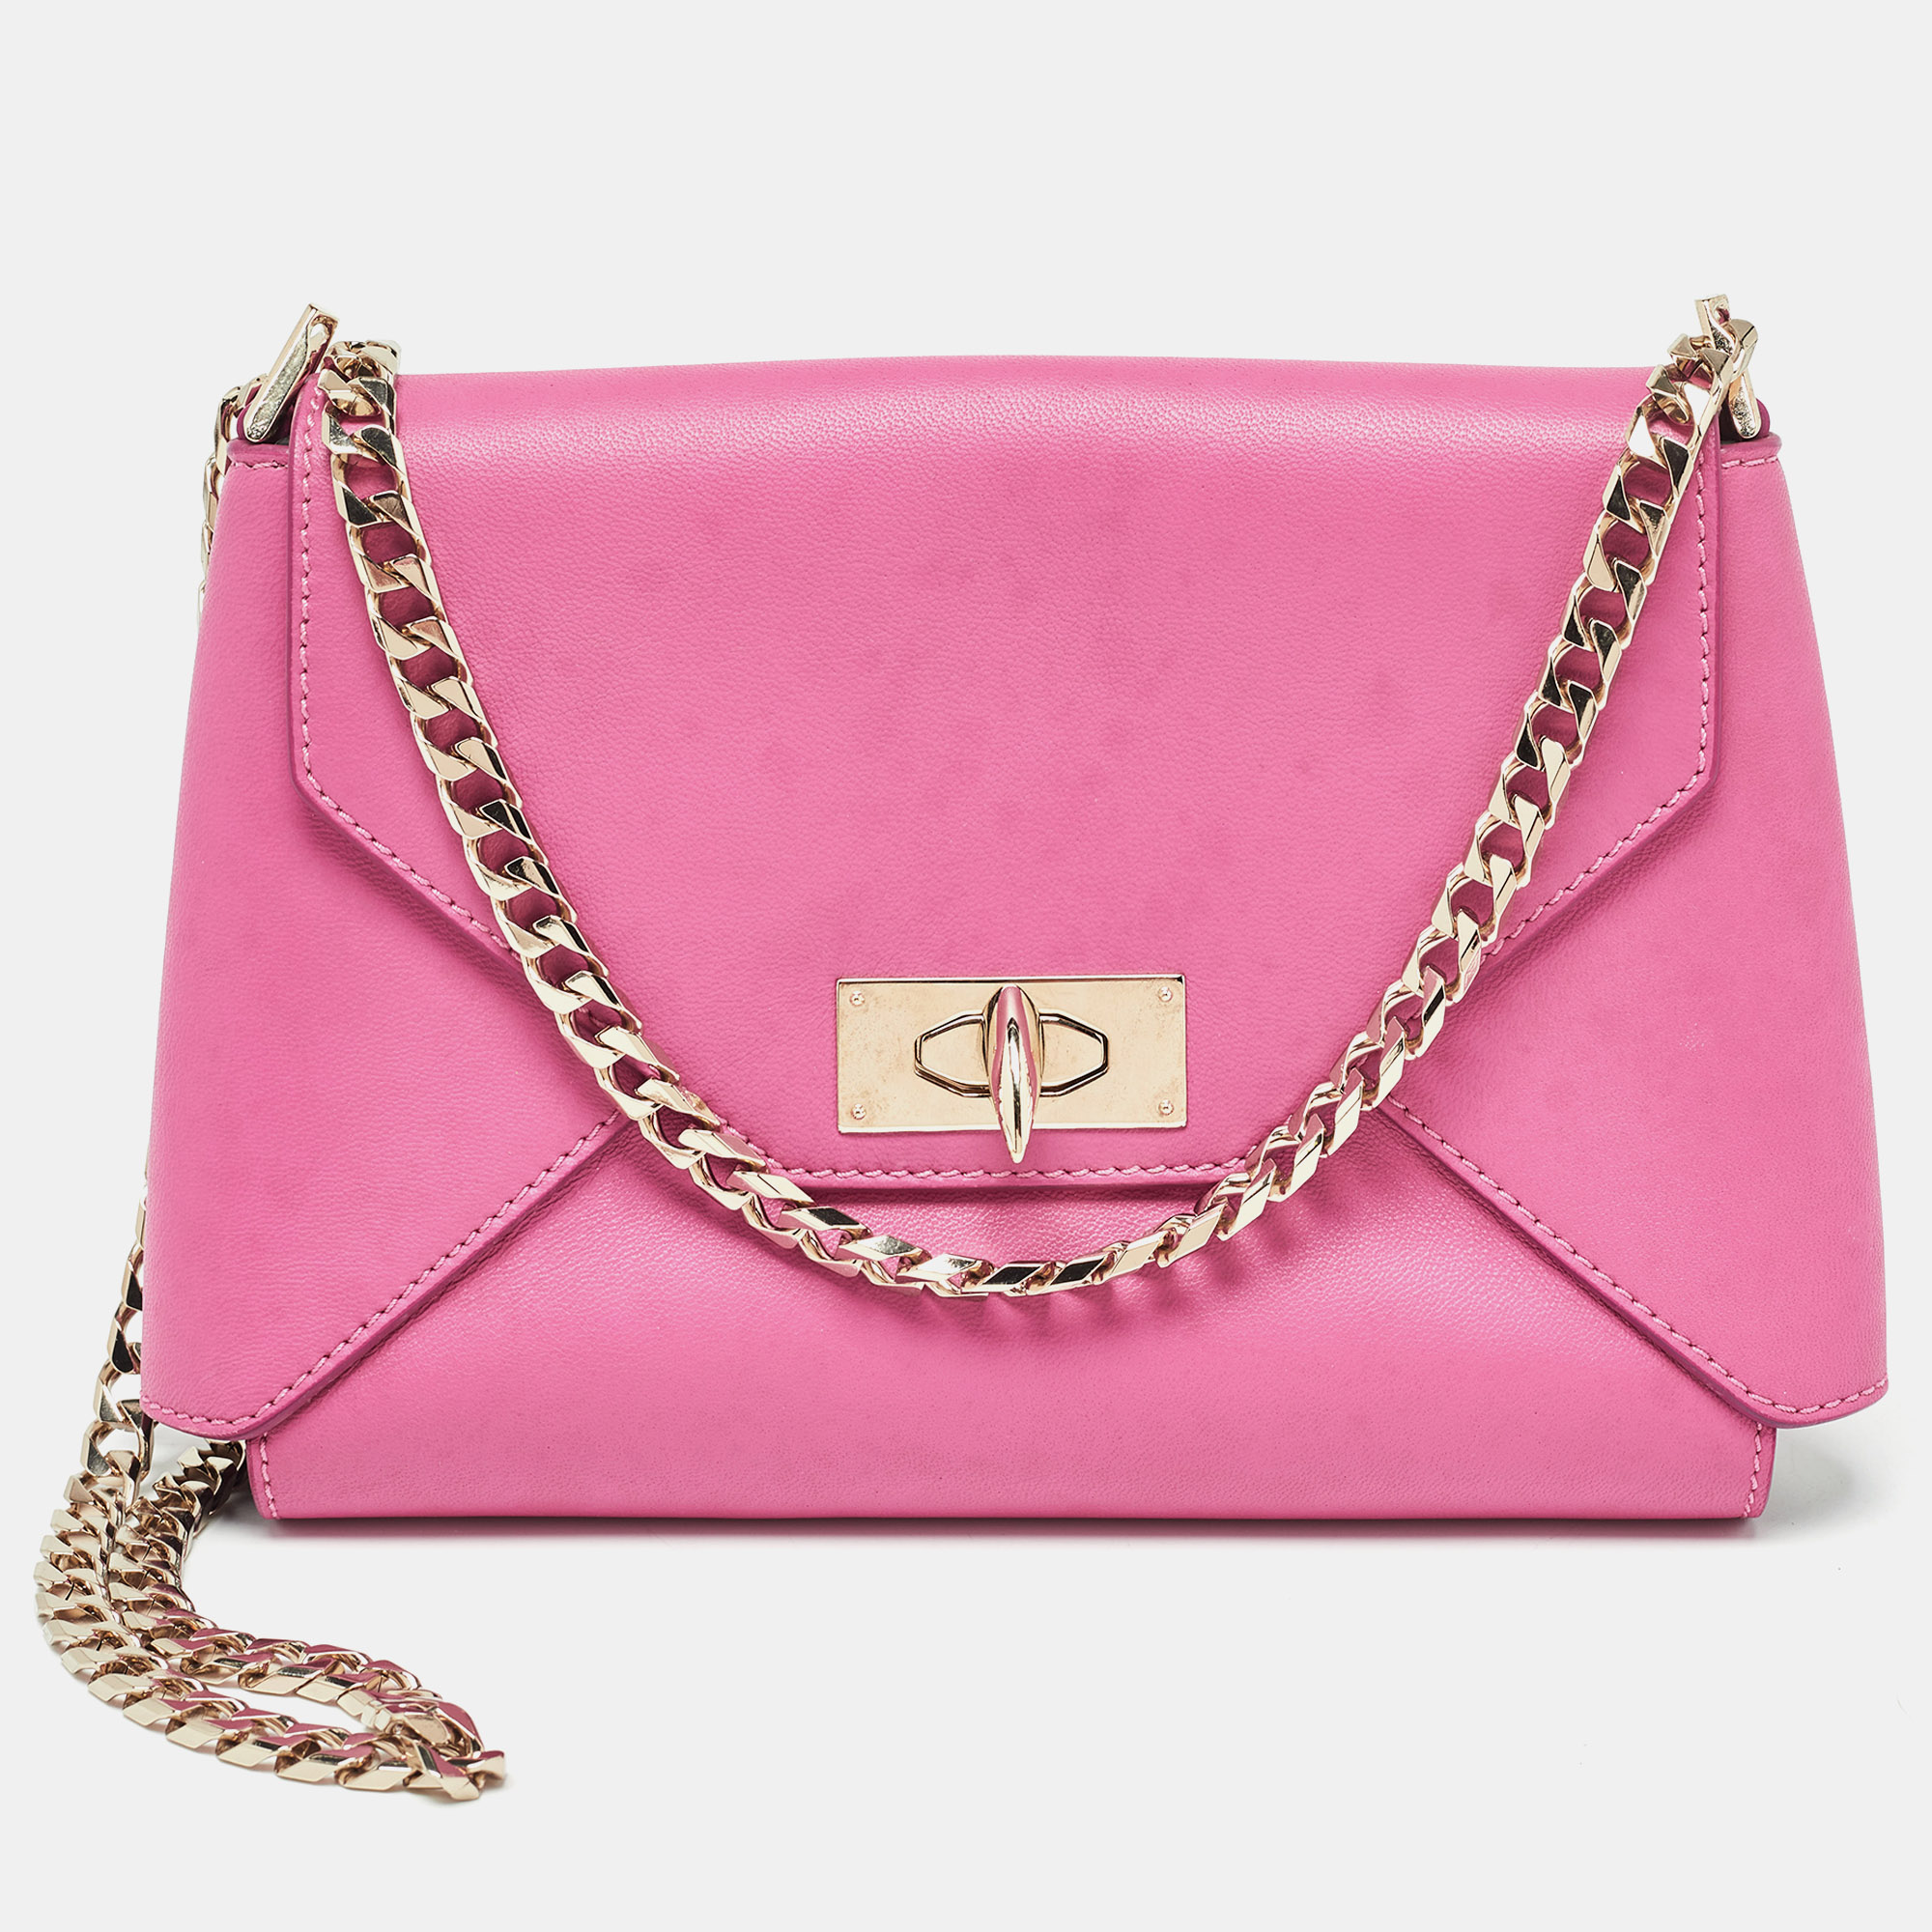 Givenchy pink leather shark lock chain clutch